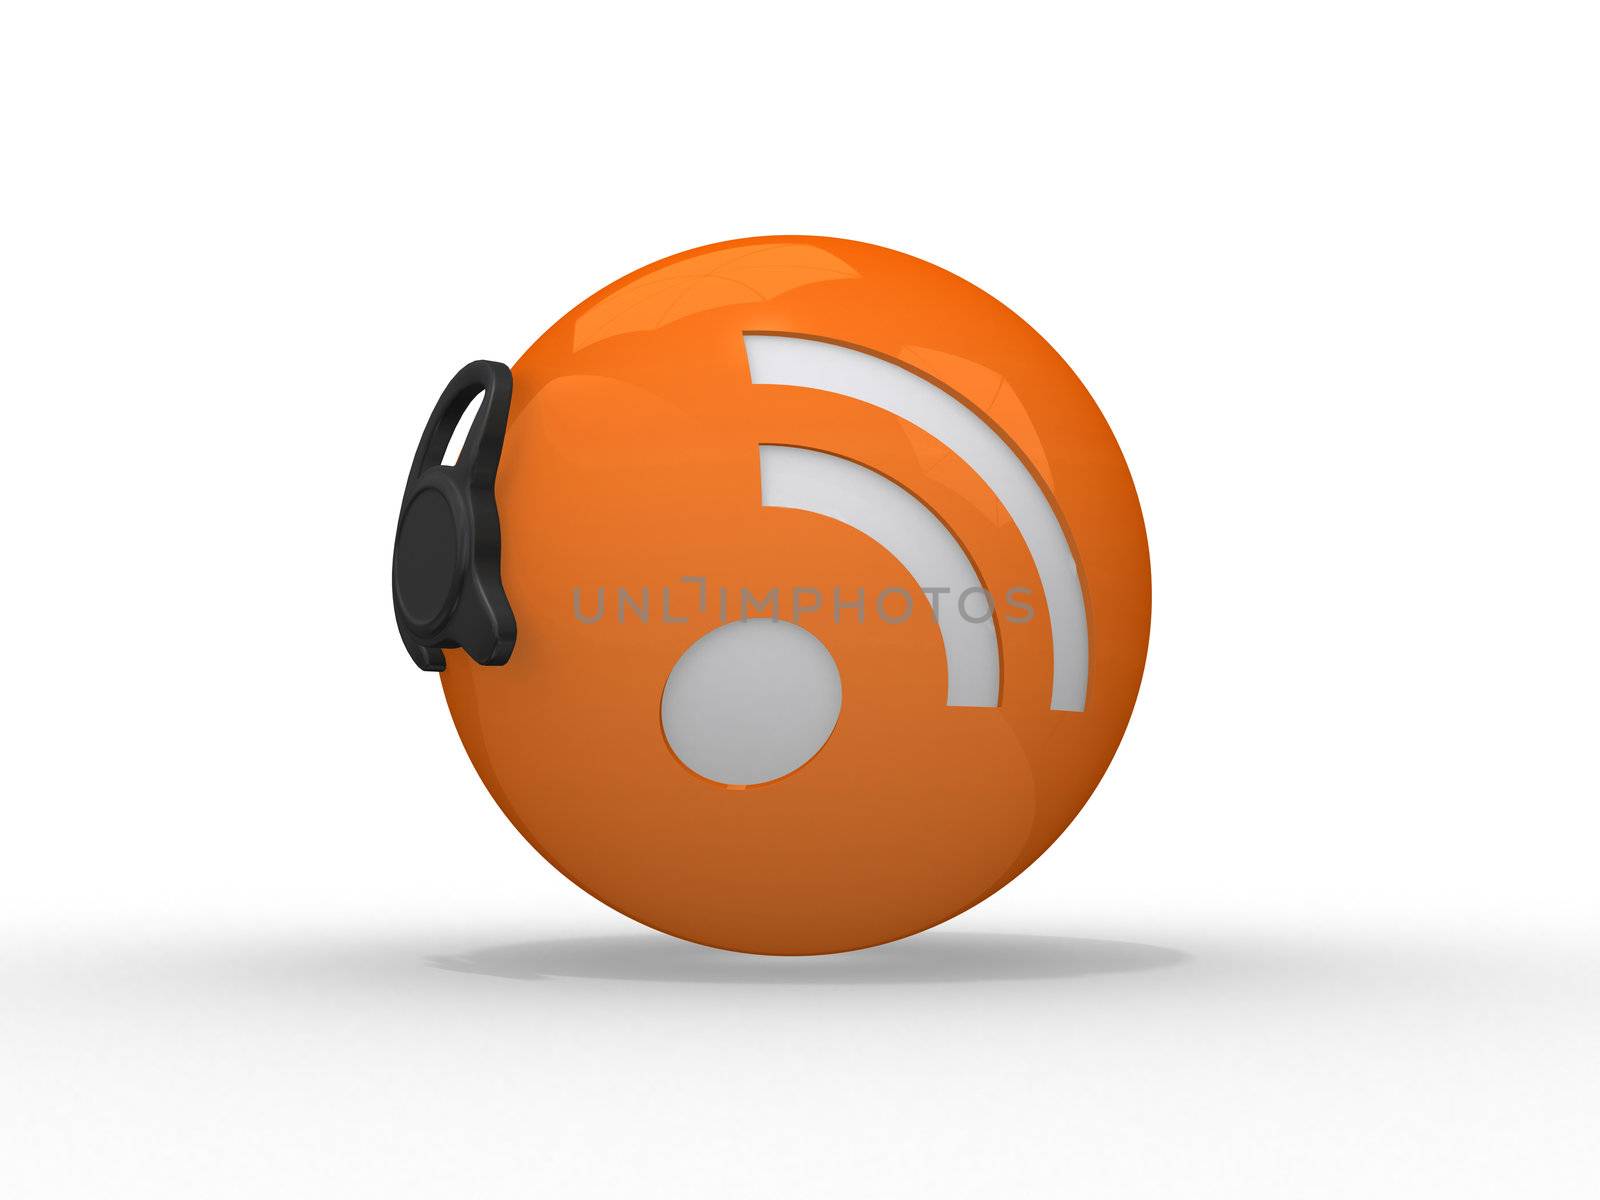 3d illustration of rss symbol with headset, orange sphere over w by dacasdo